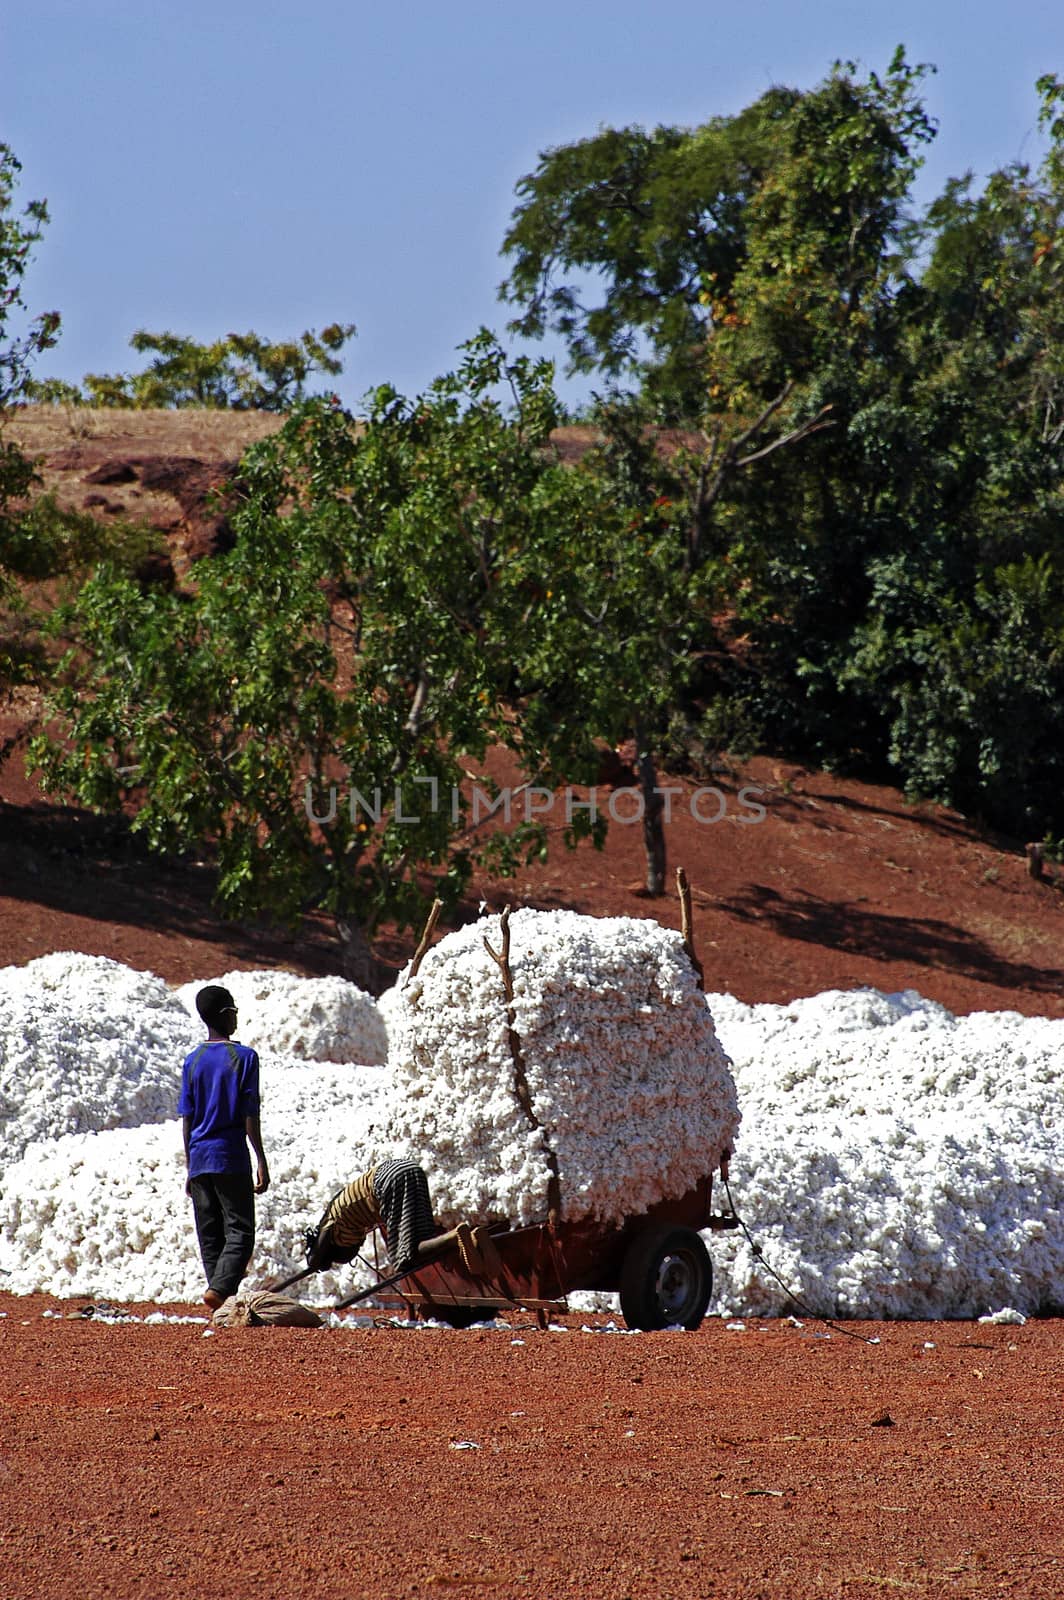 the cotton harvest by gillespaire